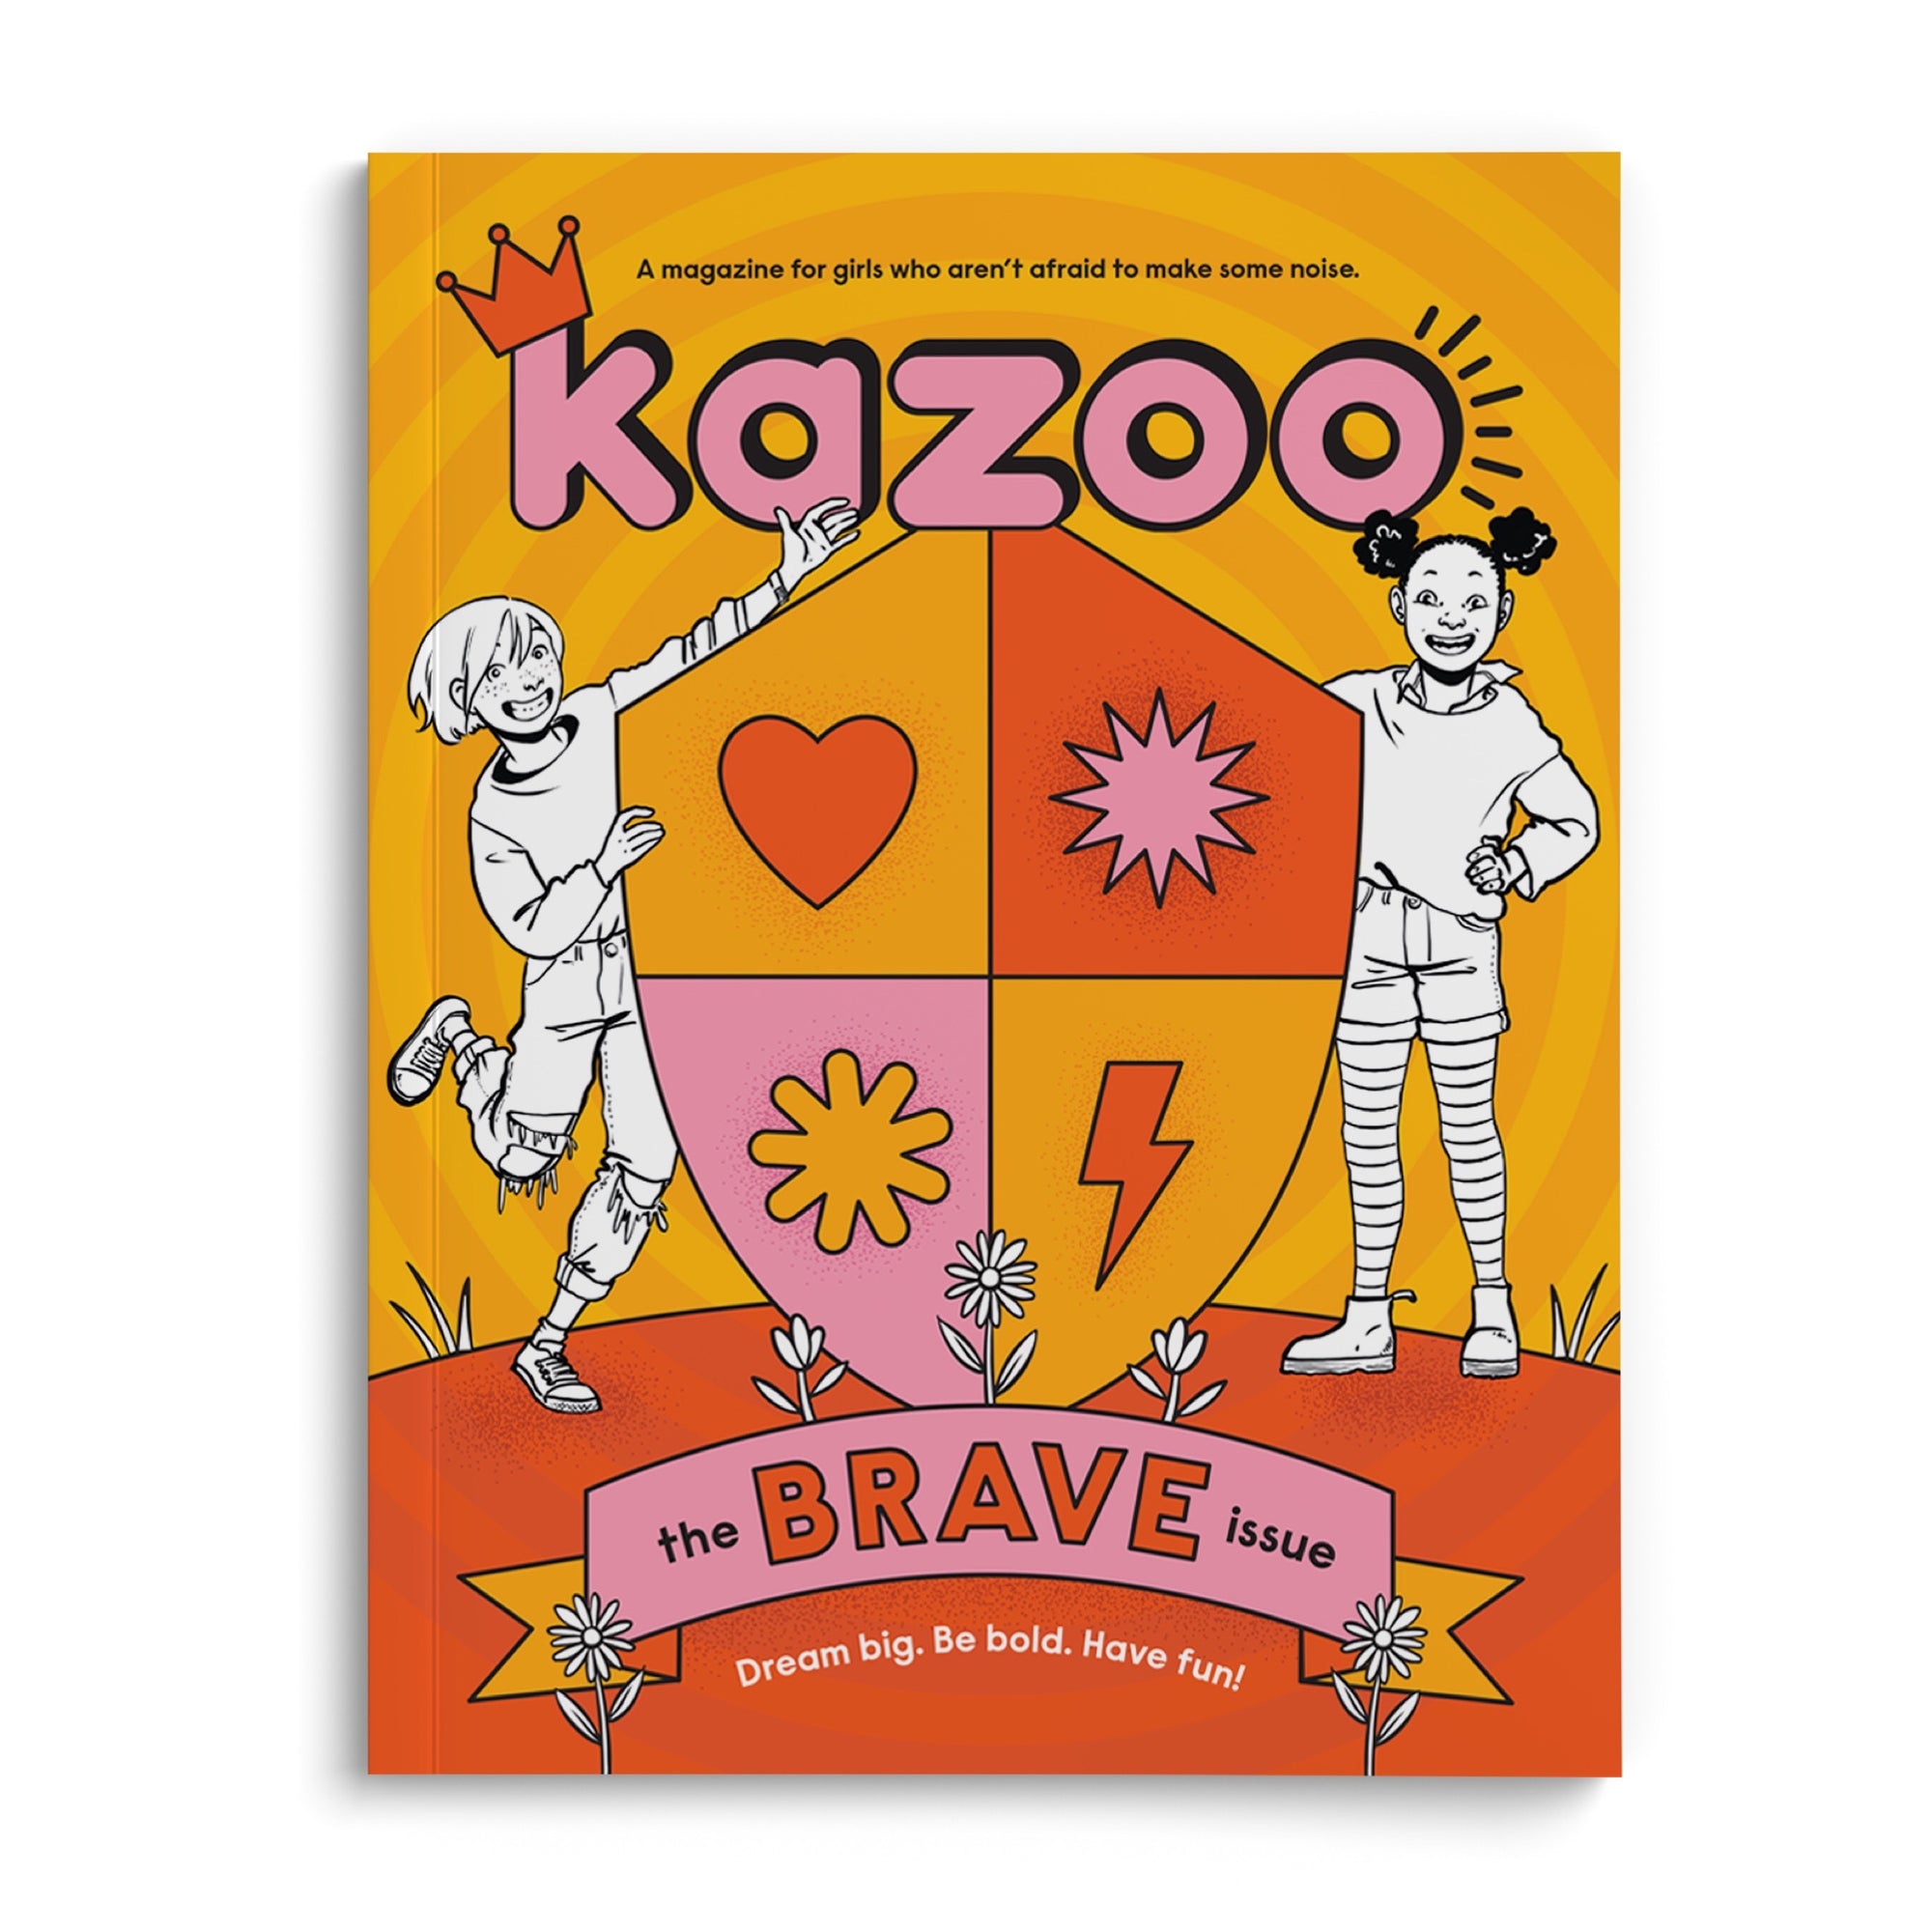 27: The Brave Issue